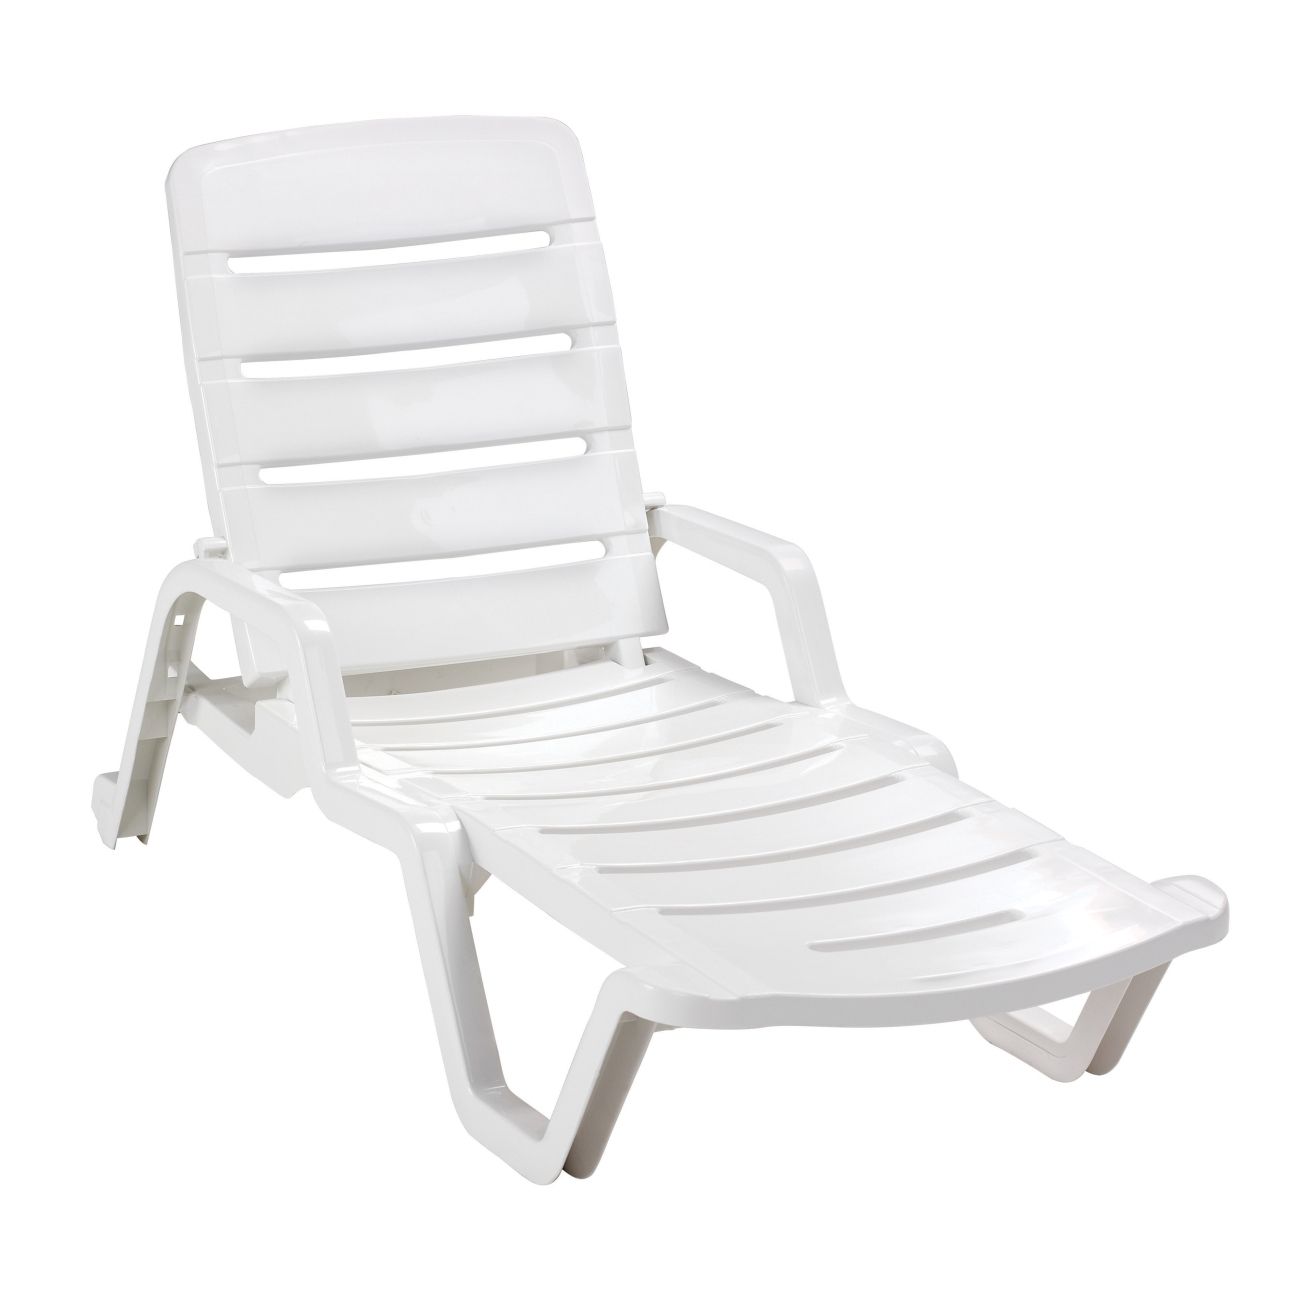 Popular Admir Plastic Chaise Lounge Chairs Cheap 82 Towards Beautiful Throughout Plastic Chaise Lounge Chairs (View 13 of 15)